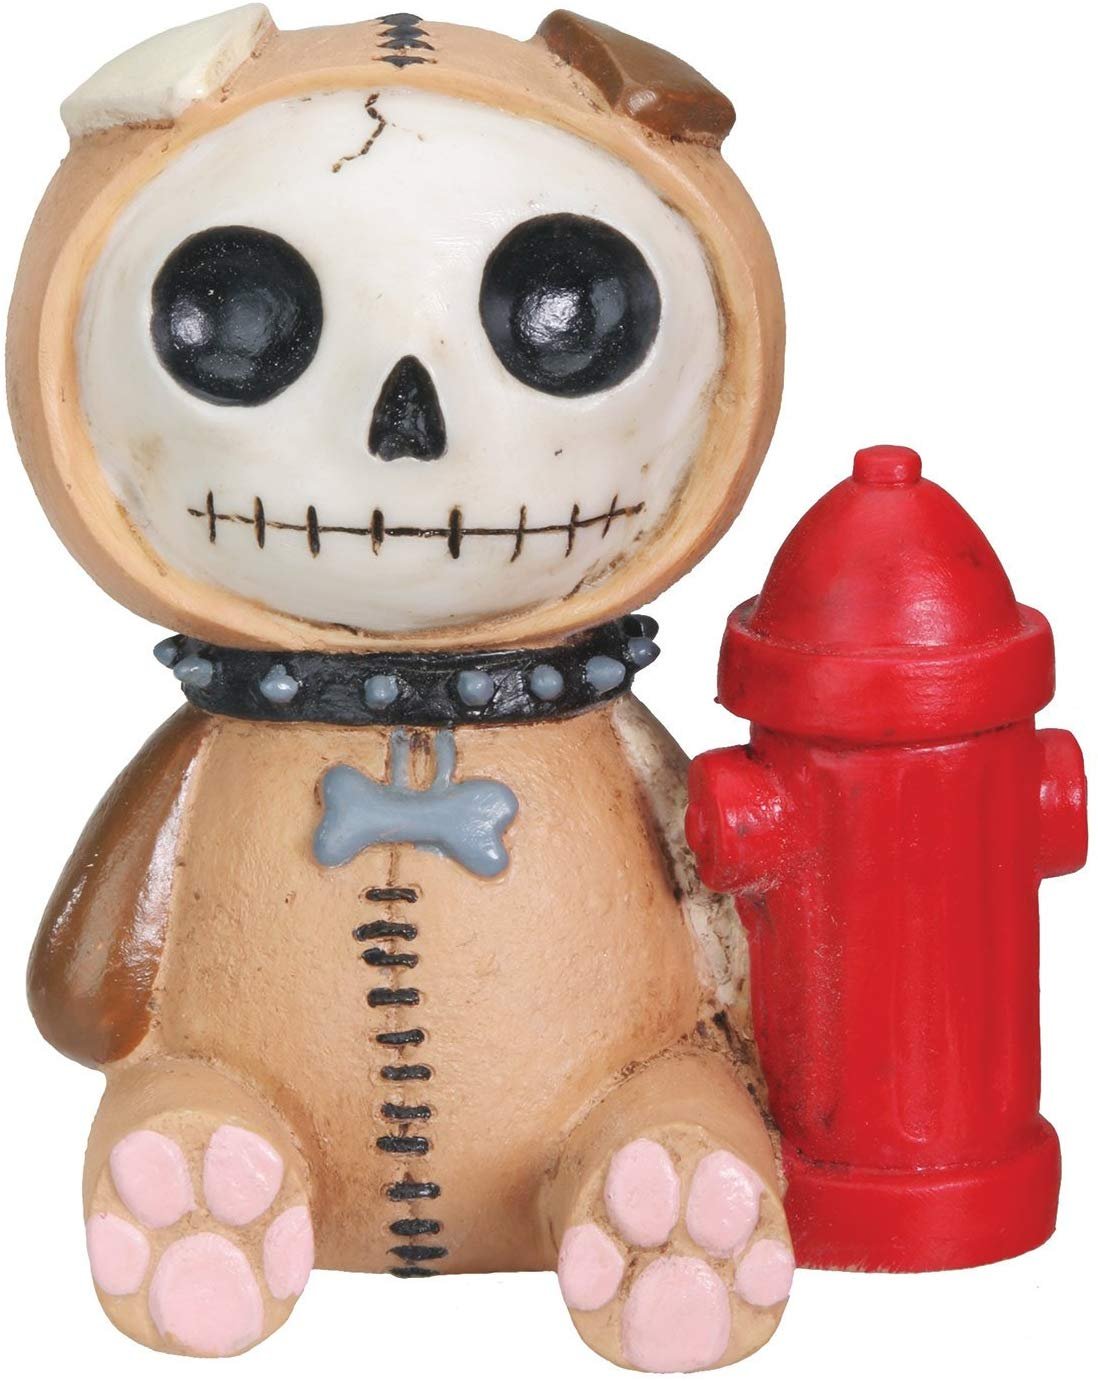 Furrybones Rocky Signature Skeleton in Doggy Costume with Red Fire Hydrant